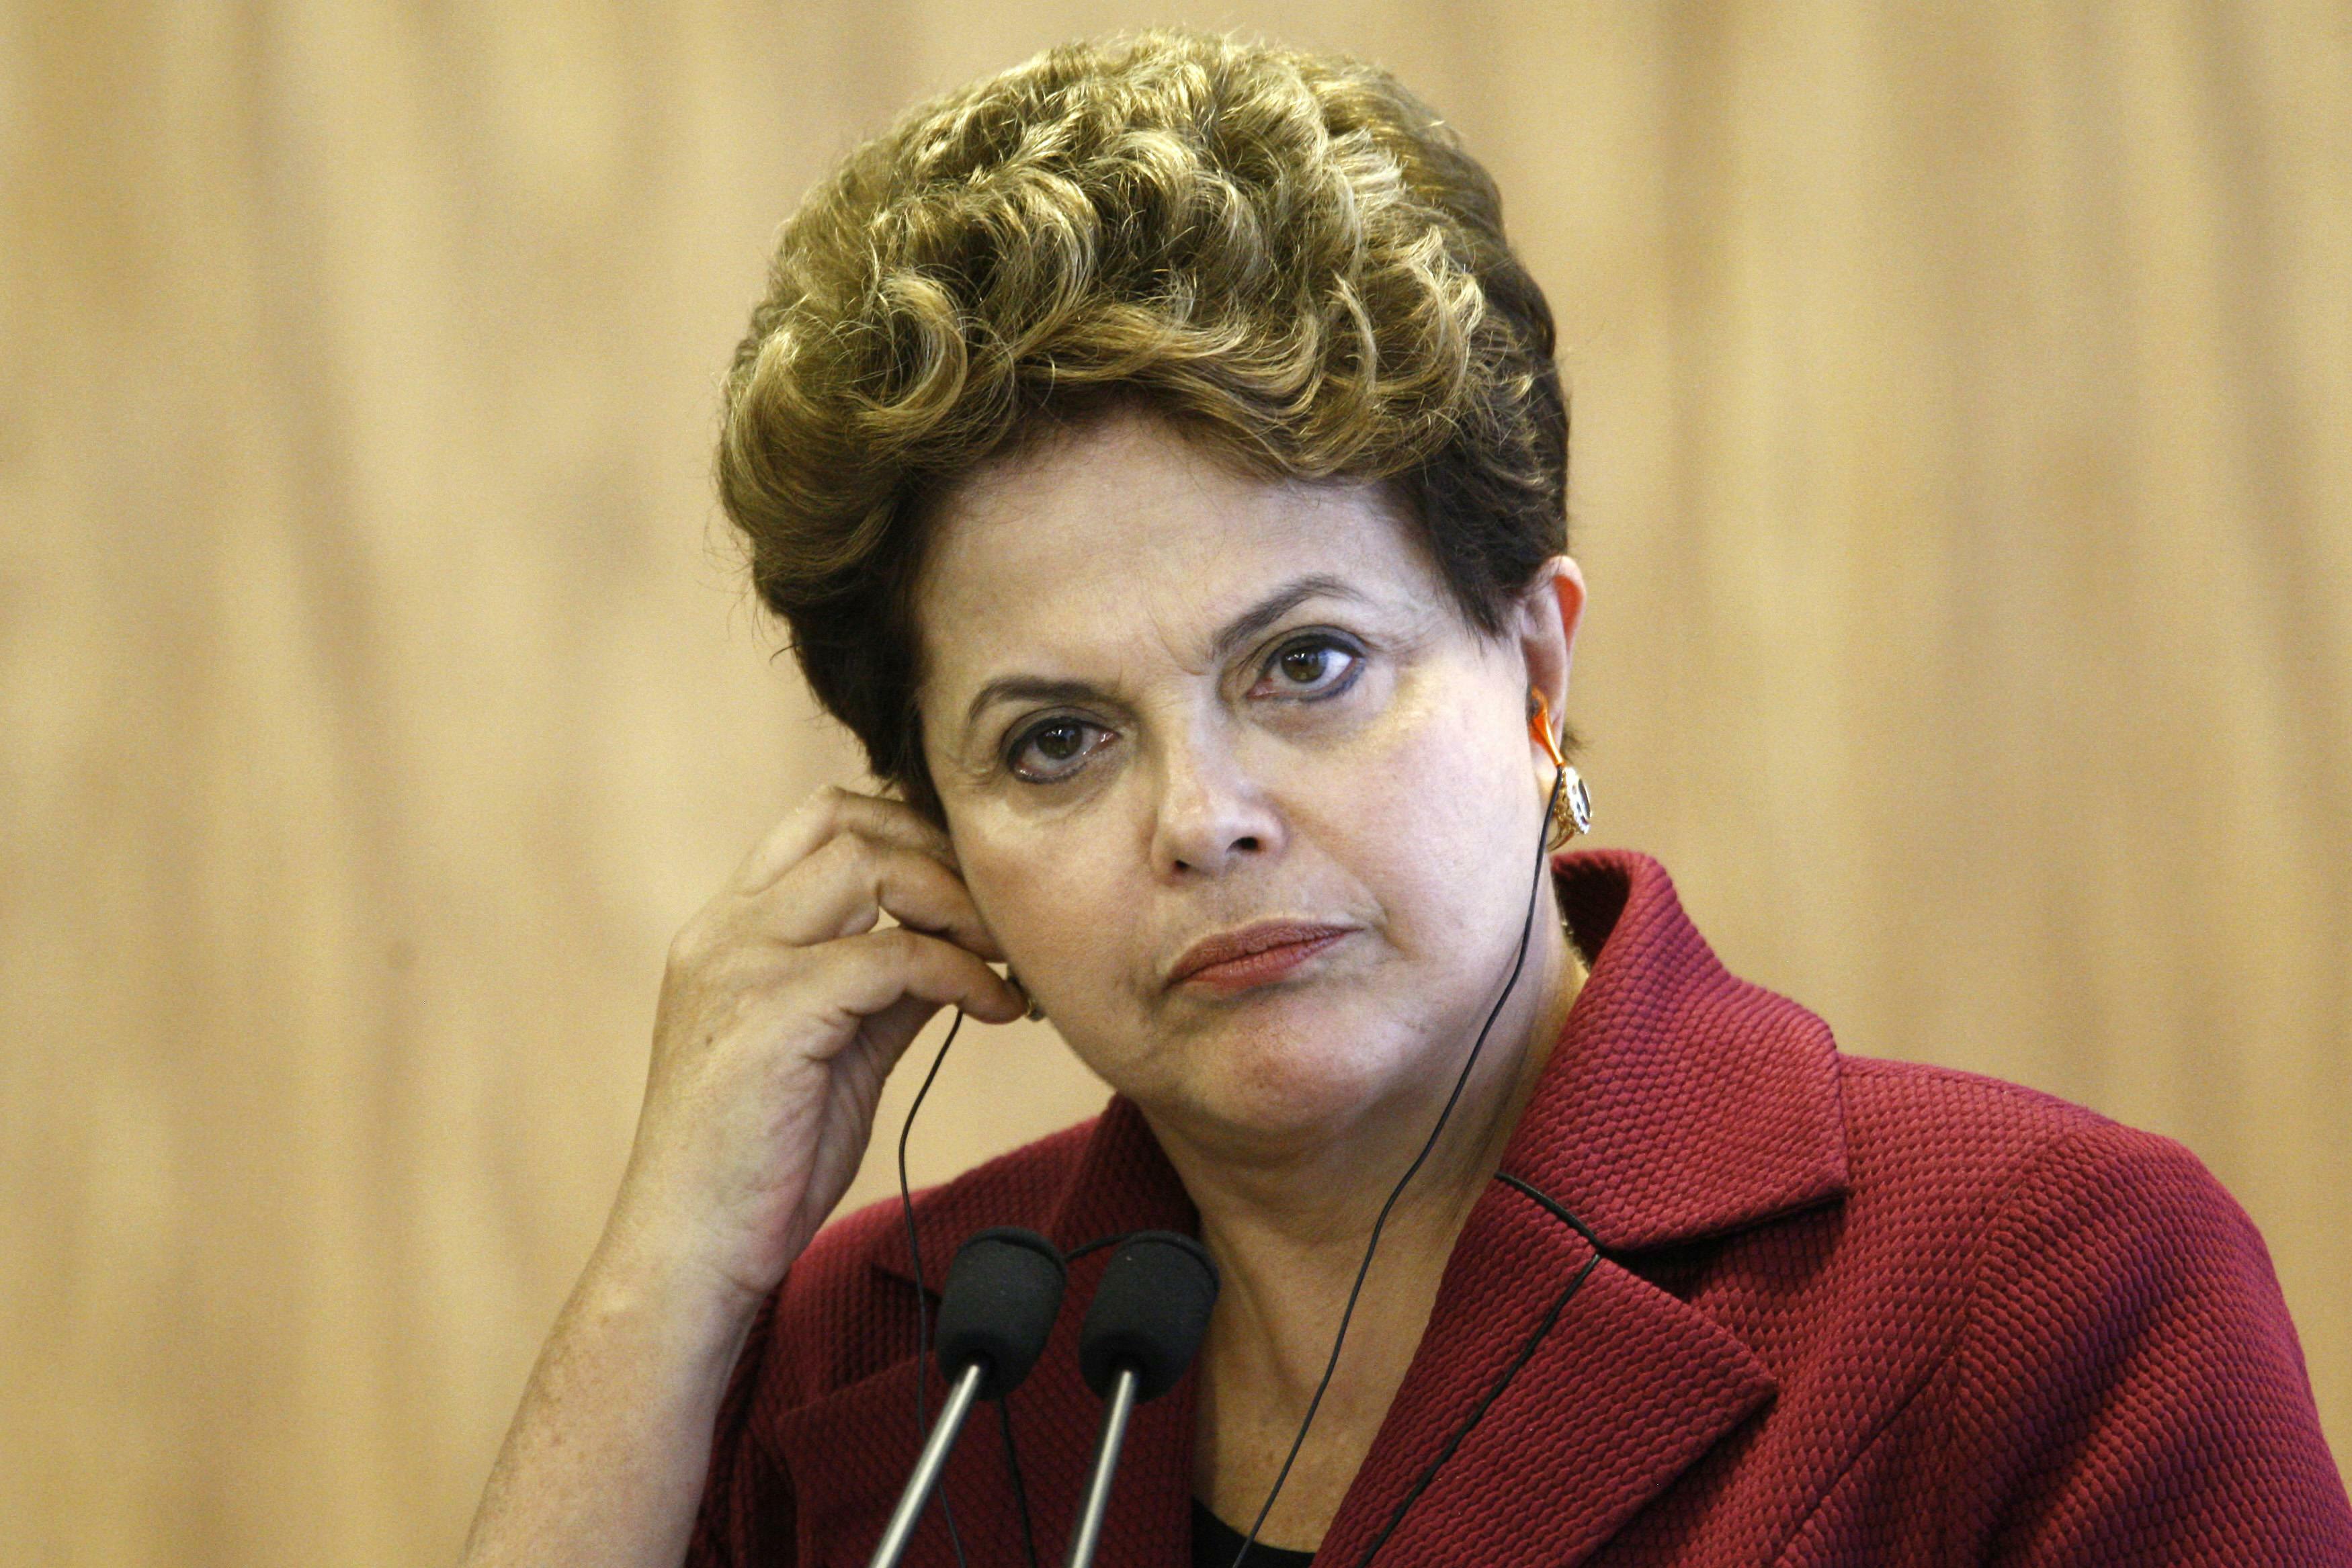 Brazil Senate meets to indict suspended president Dilma Rousseff